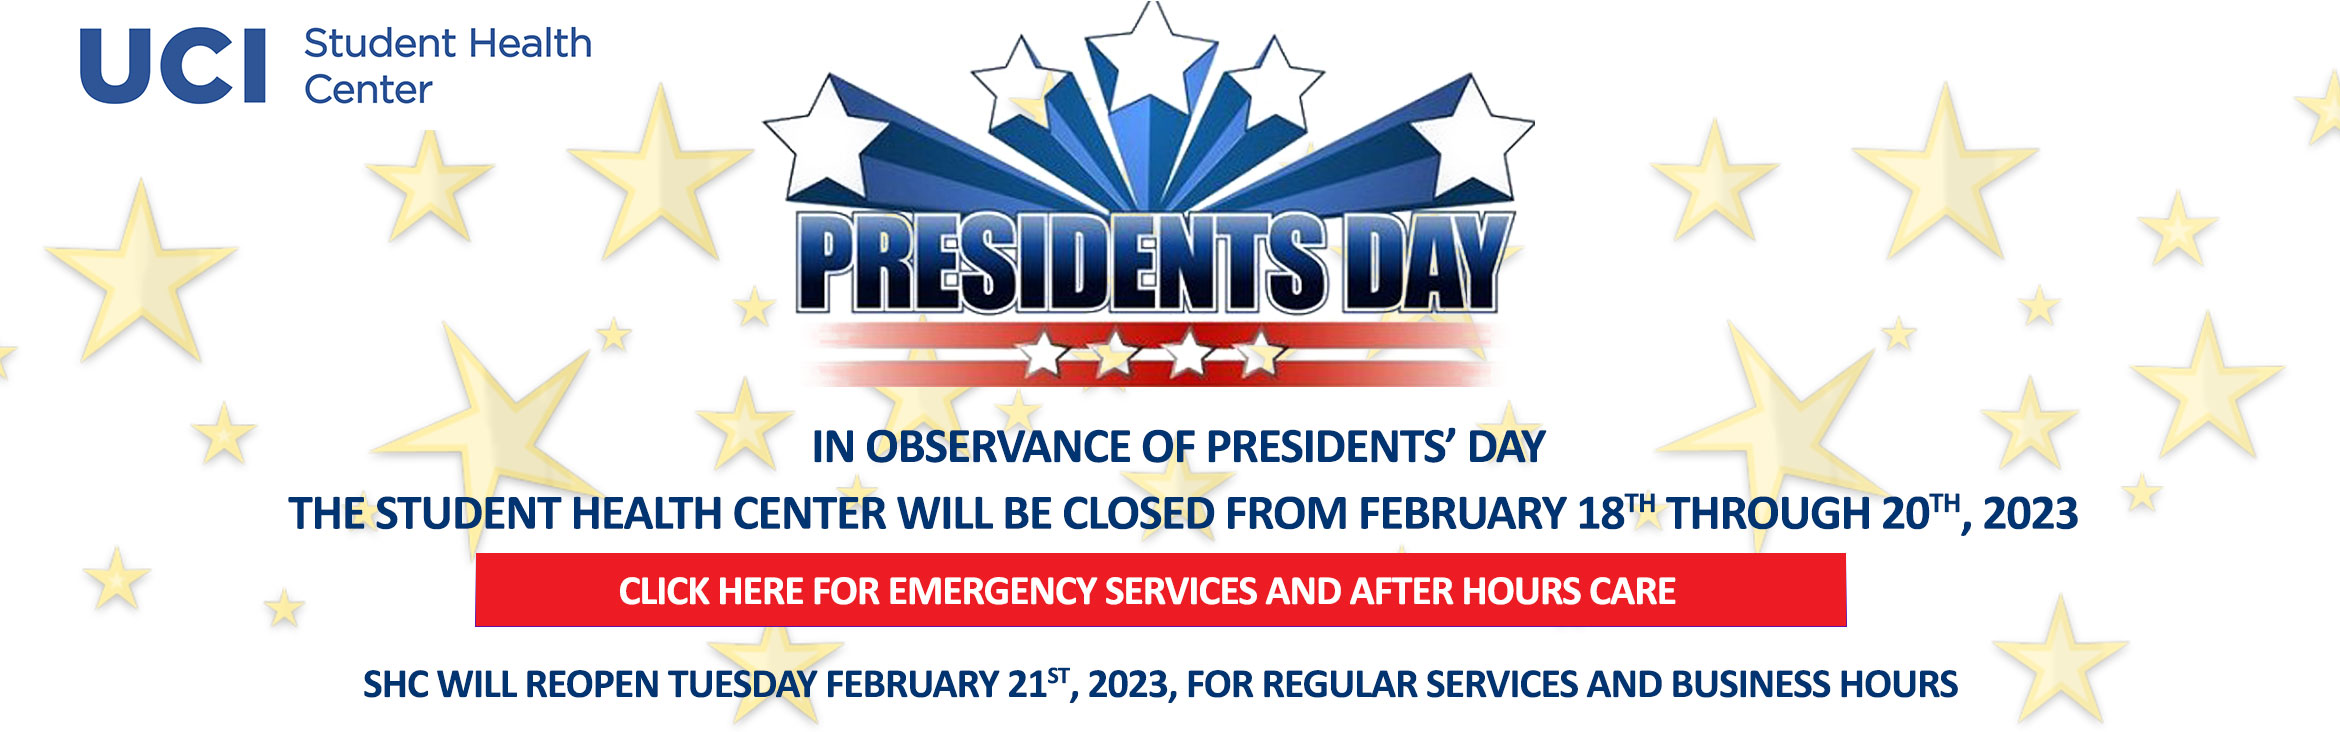 In Observance of Presidents' Day the Student Health Center will be closed February 18 through February 20, 2023.